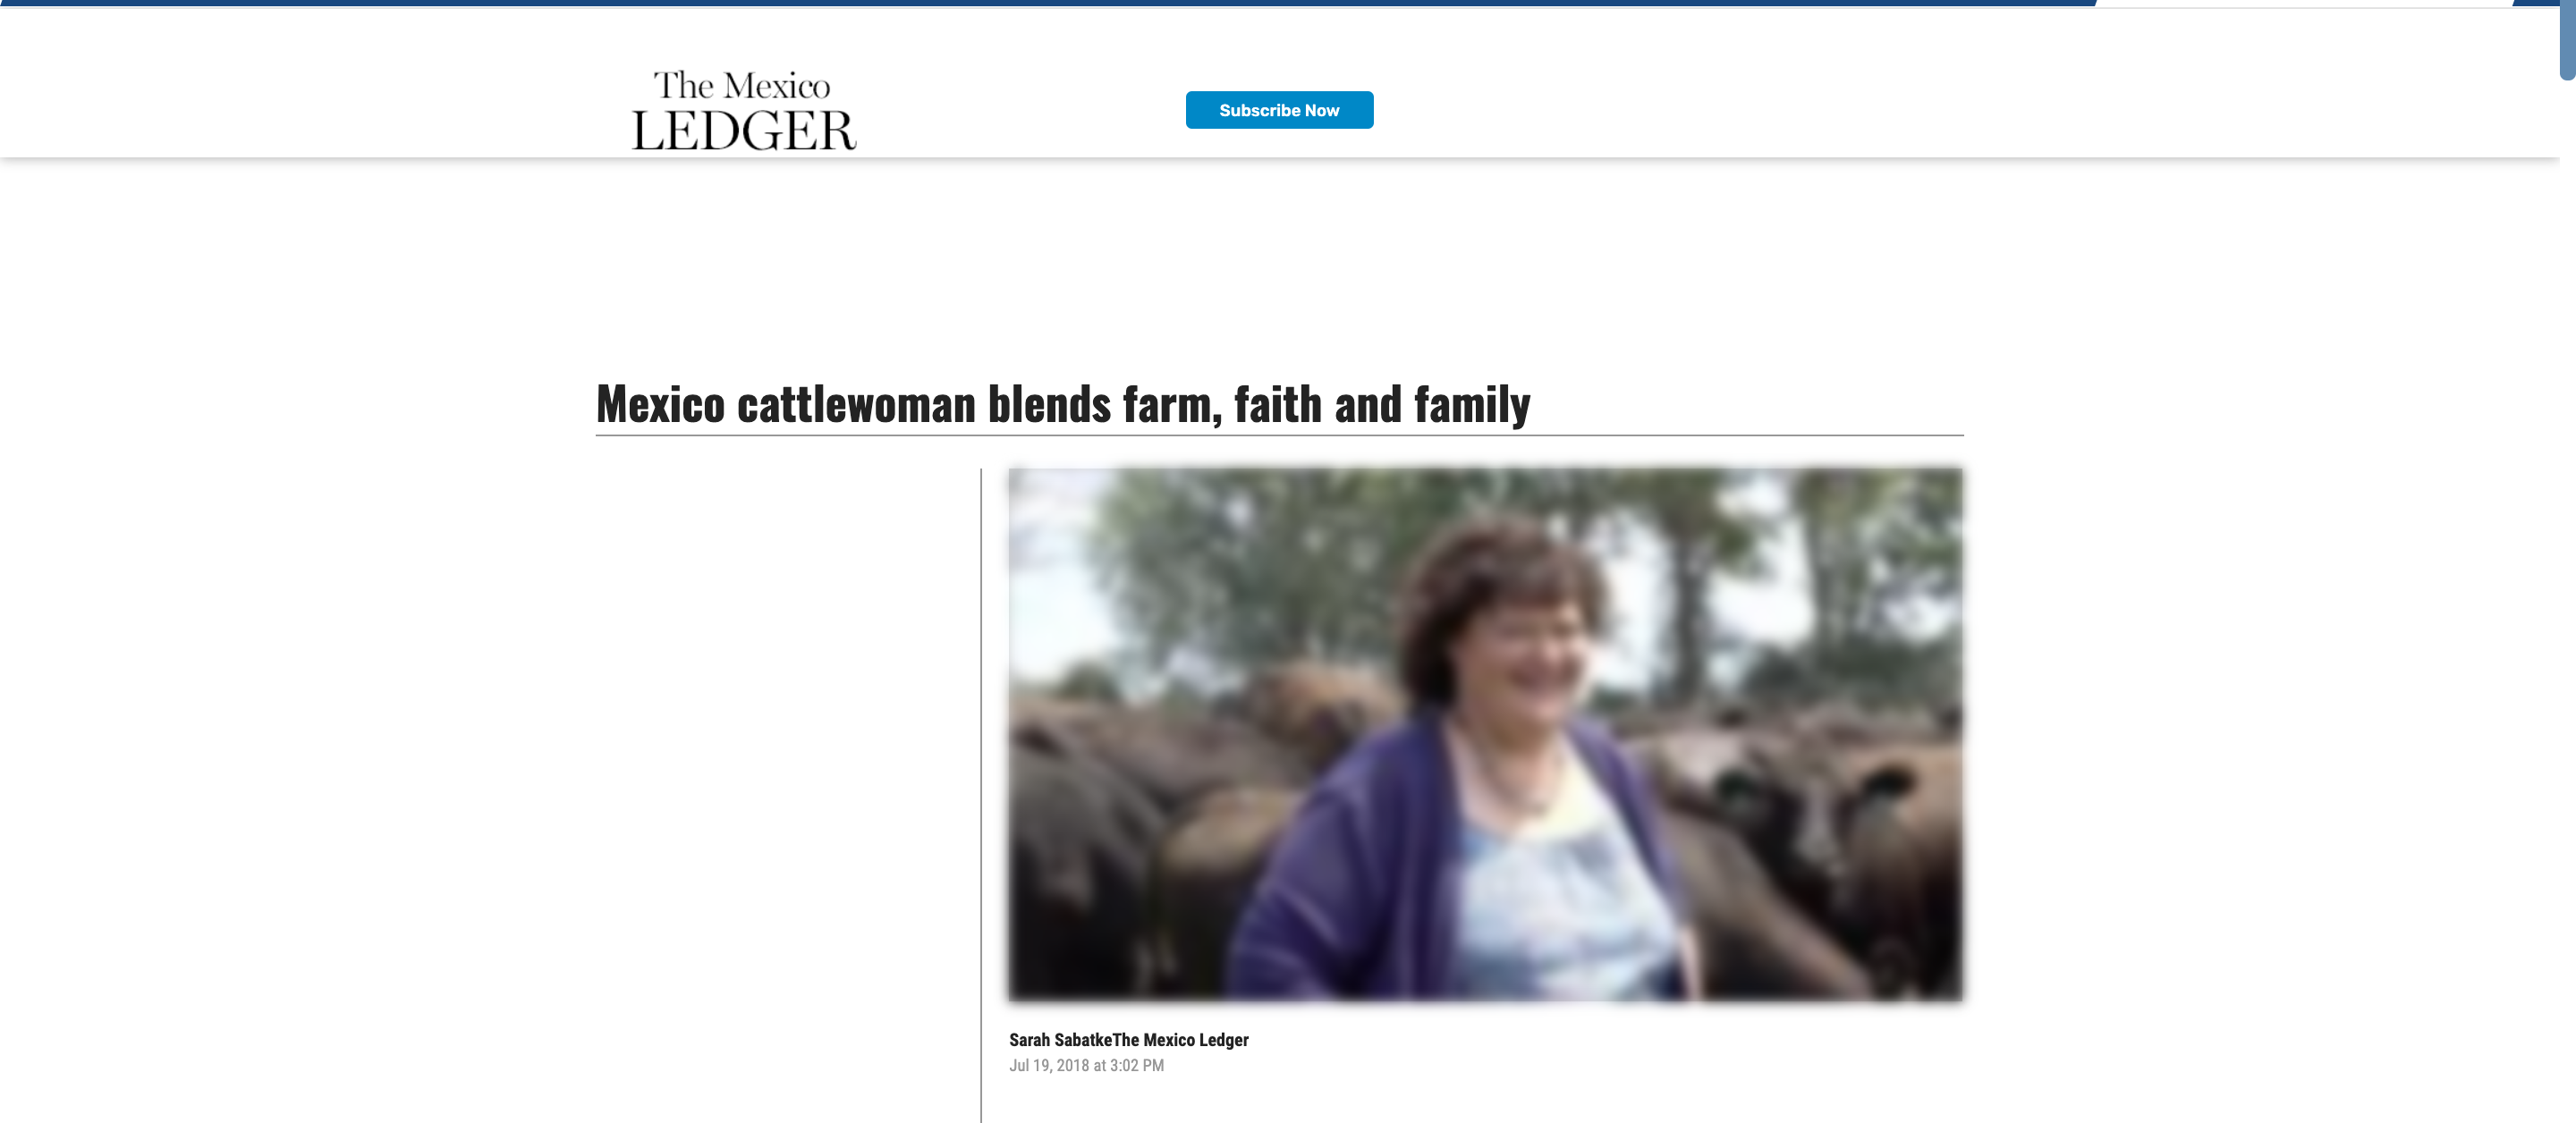 Thumbnail of Mexico cattlewoman blends farm, faith and family